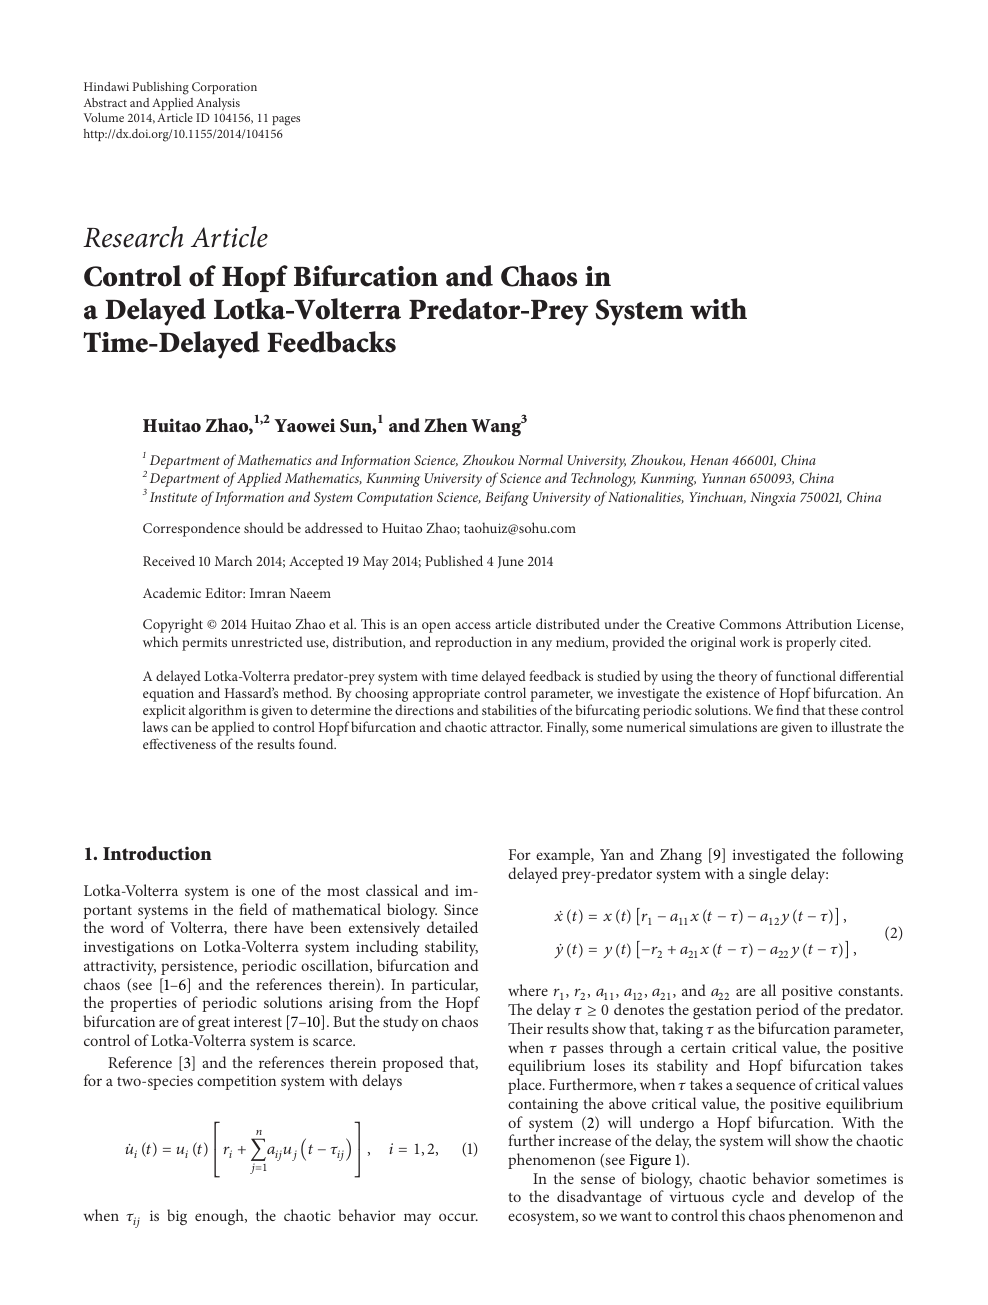 Control Of Hopf Bifurcation And Chaos In A Delayed Lotka Volterra Predator Prey System With Time Delayed Feedbacks Topic Of Research Paper In Mathematics Download Scholarly Article Pdf And Read For Free On Cyberleninka